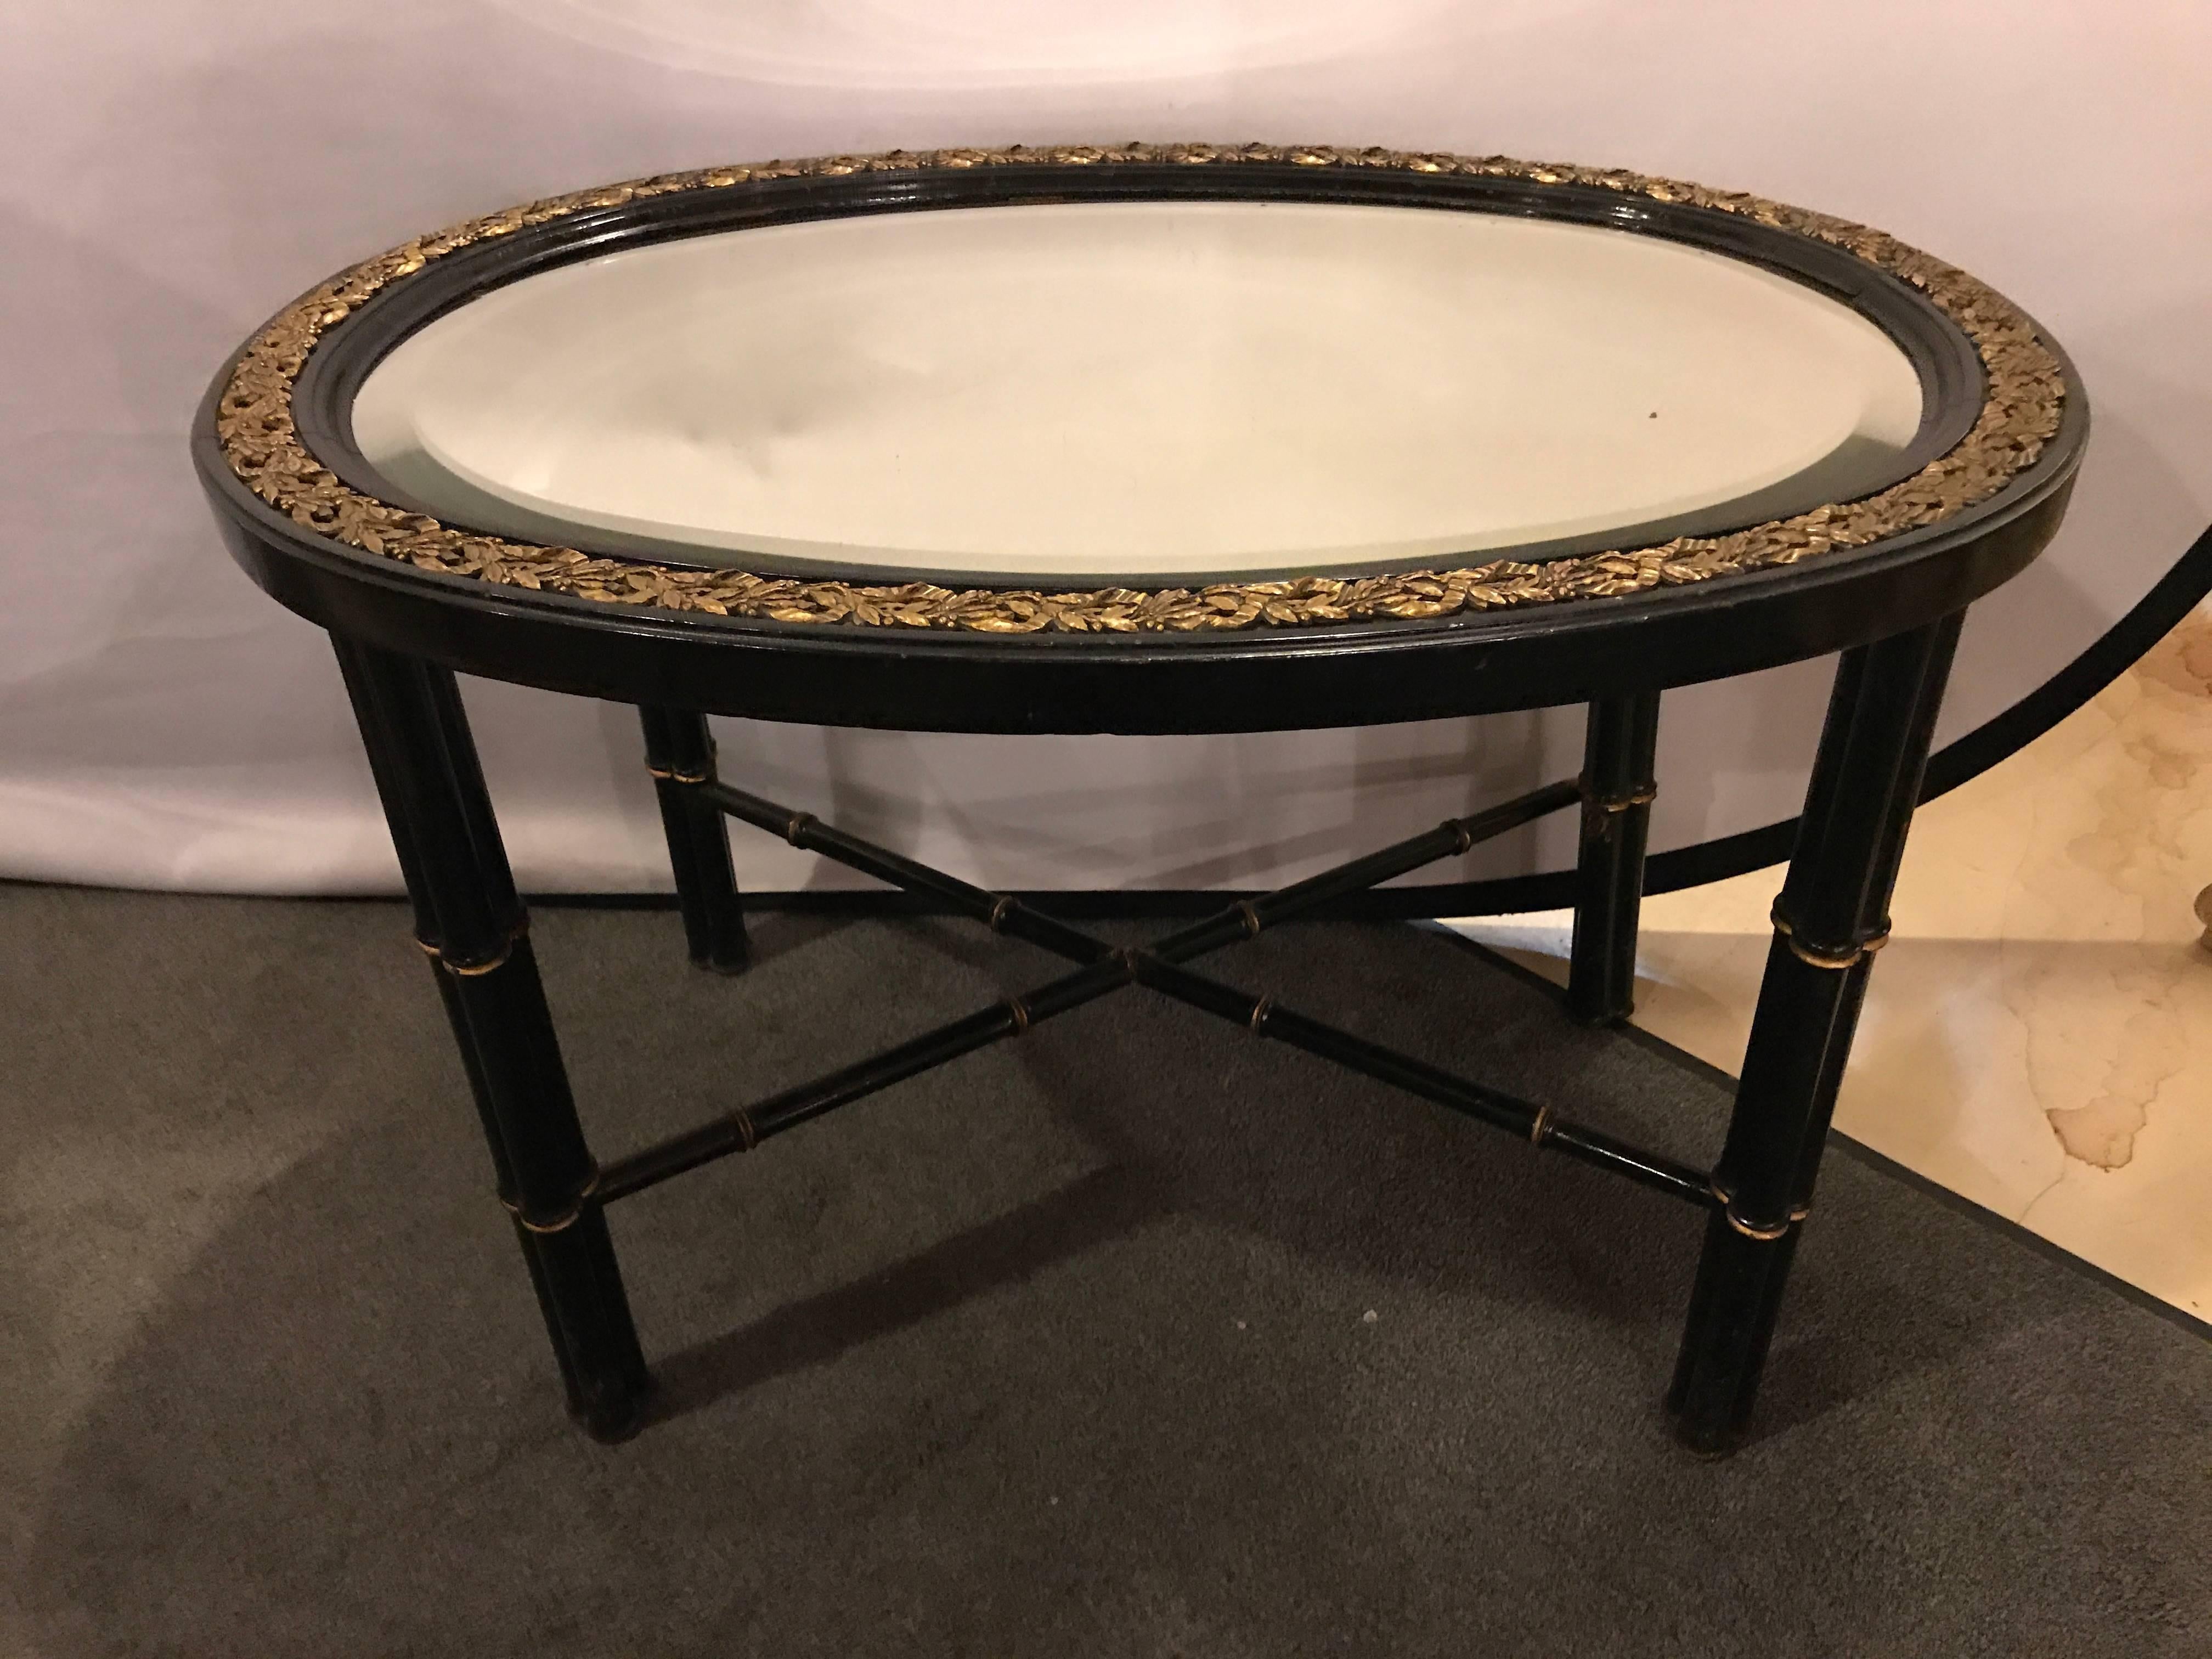 Beveled mirror top black oval coffee table with bronze mounts. This fine Hollywood Regency bamboo form coffee table has a charm and allure that is certain to bring attention to itself. The beveled mirror oval top having a bronze framed border of